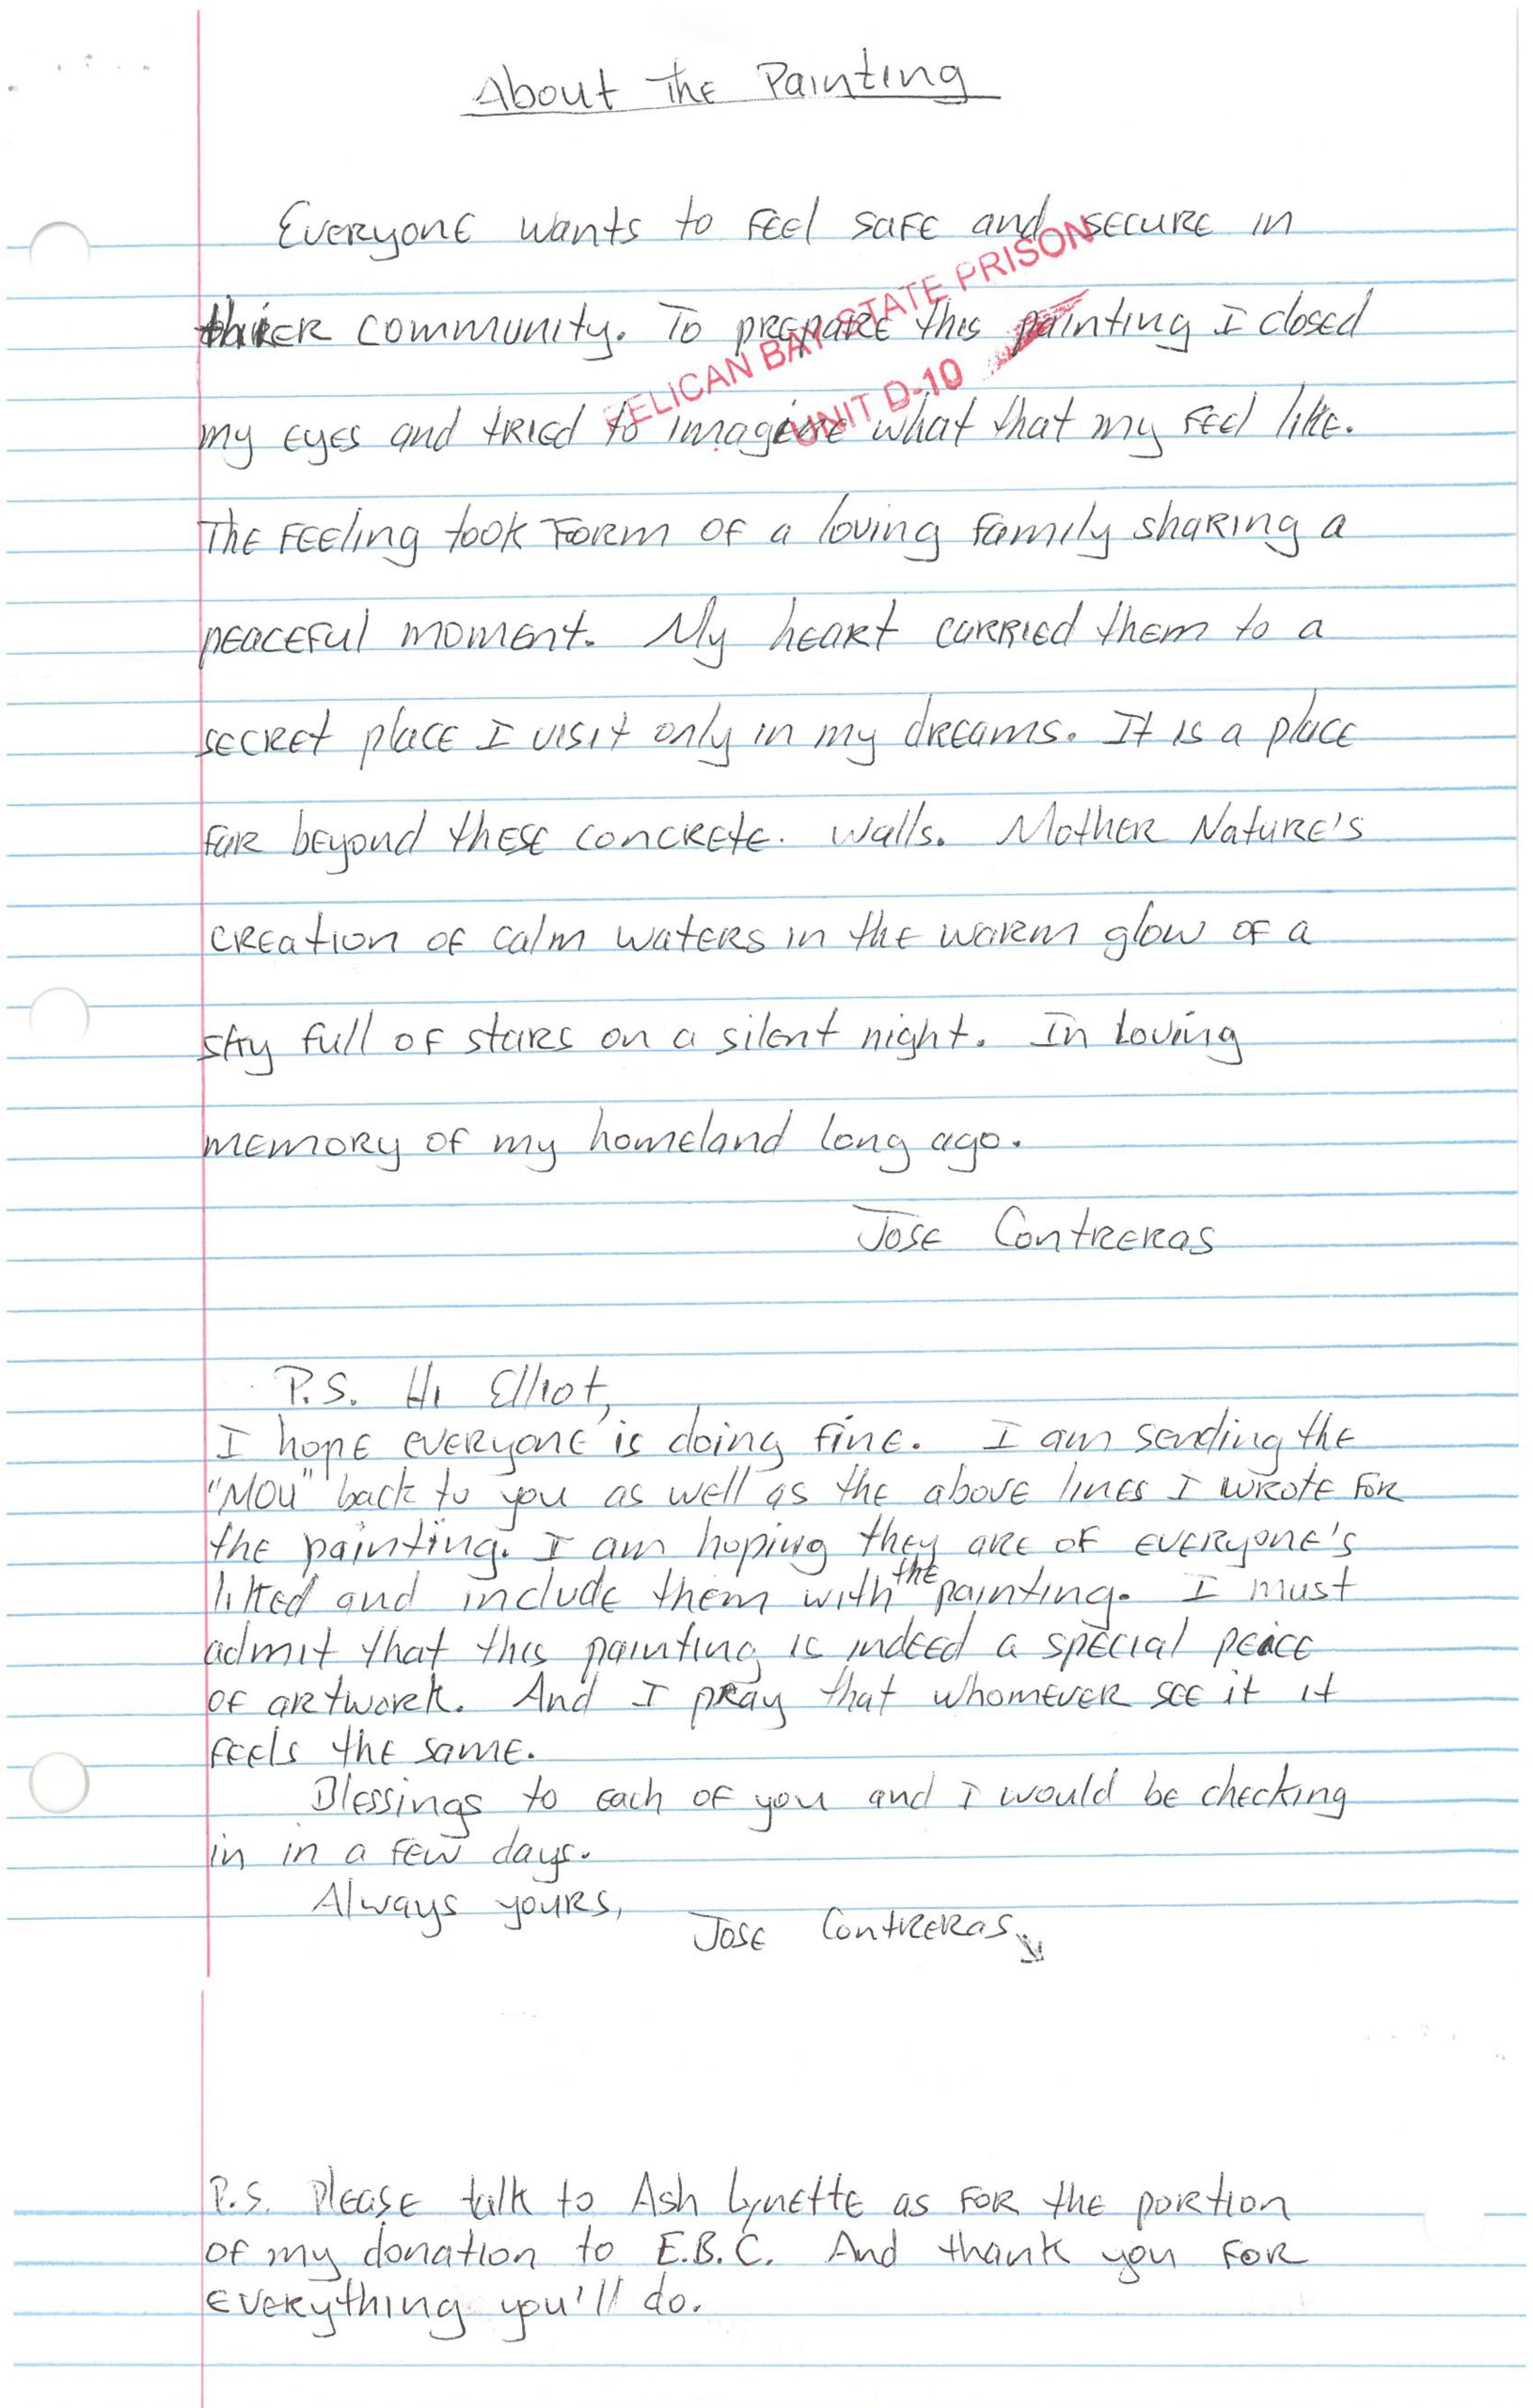 A handwritten letter from the artist describes the meaning of his untitled painting in relationship to his experience of incarceration in blue pen on lined paper.